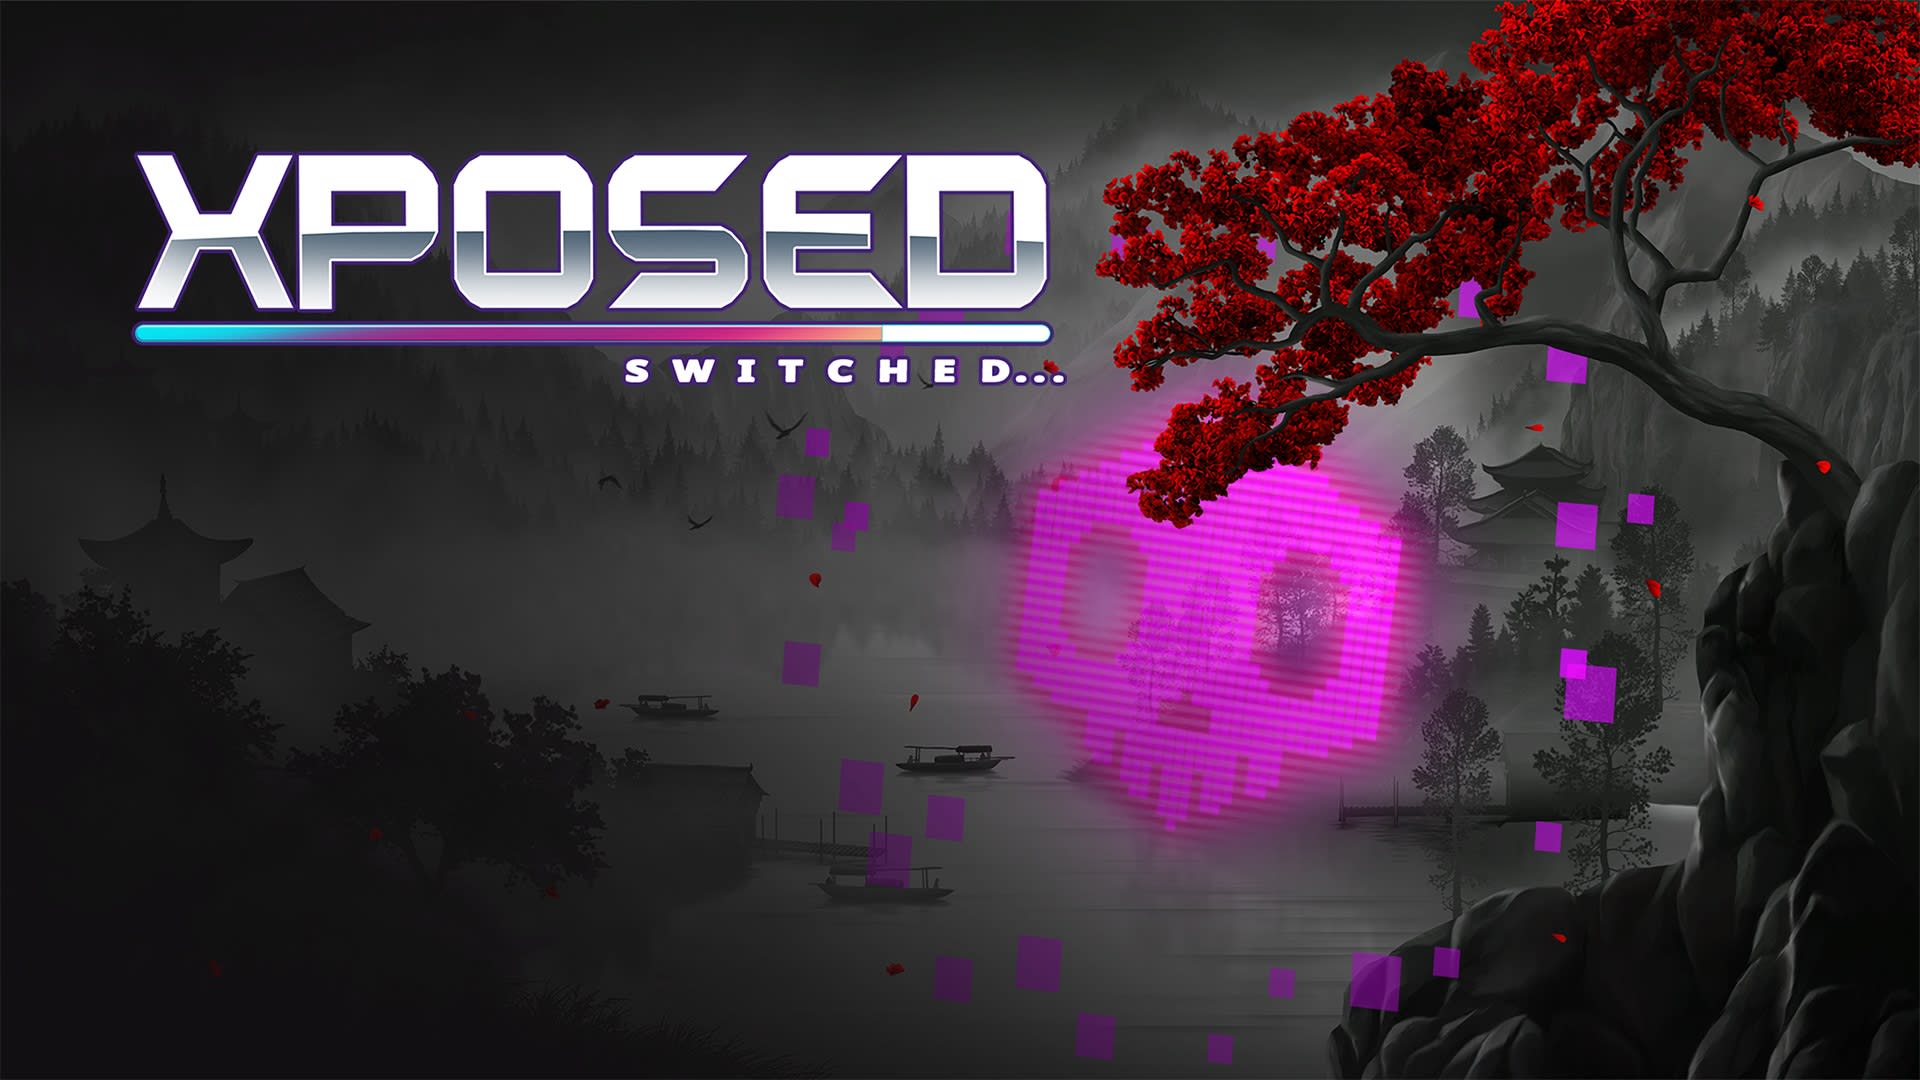 XPOSED SWITCHED